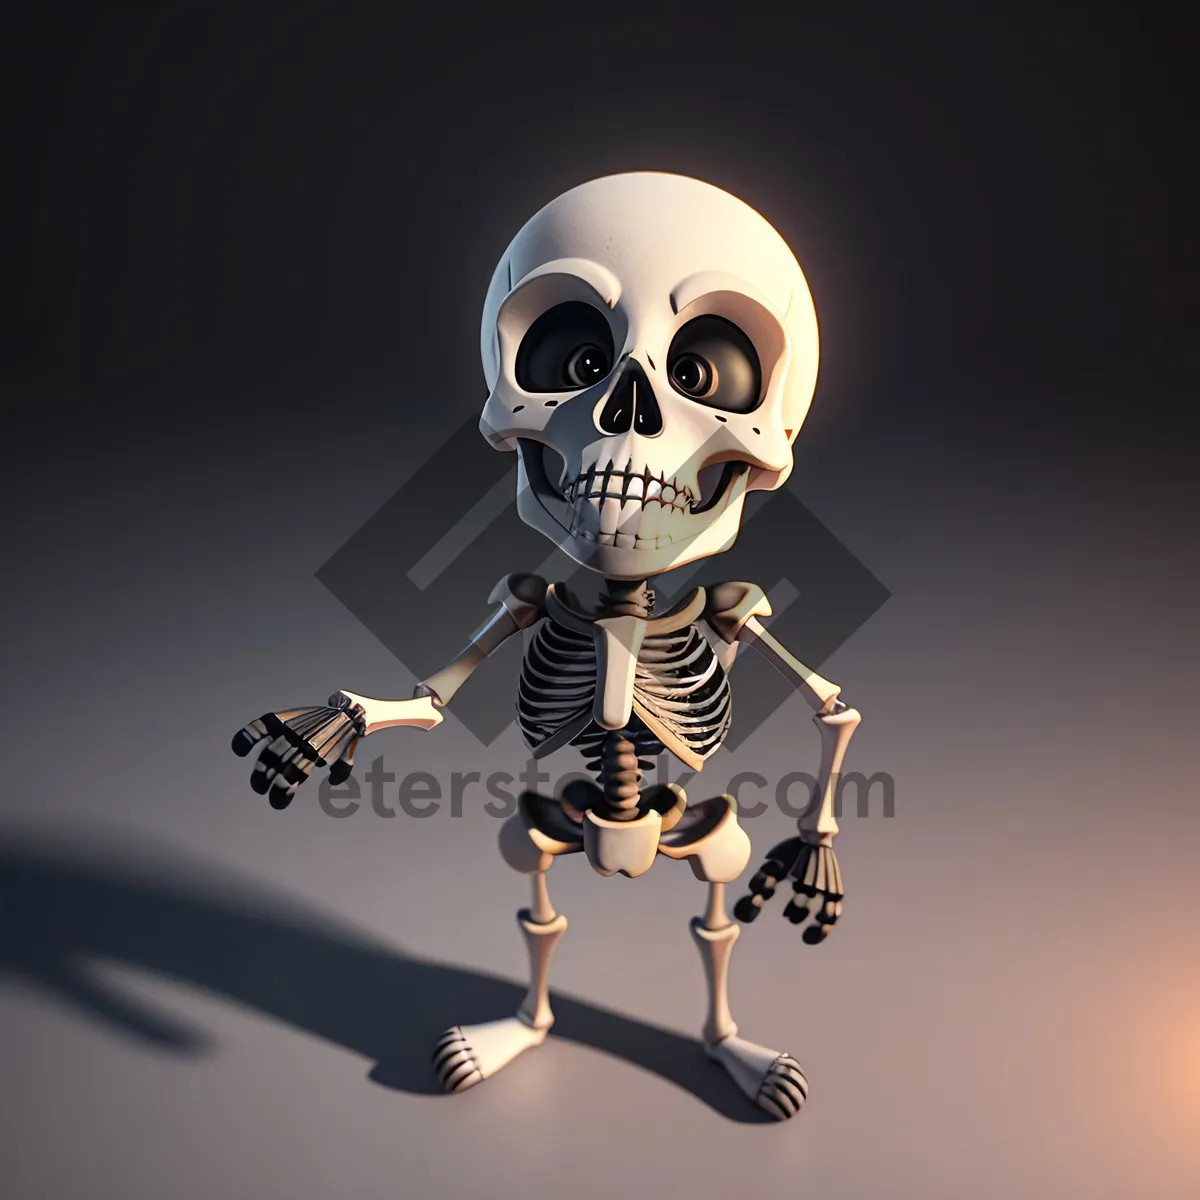 Picture of Spooky Skeleton Pirate Cartoon Image